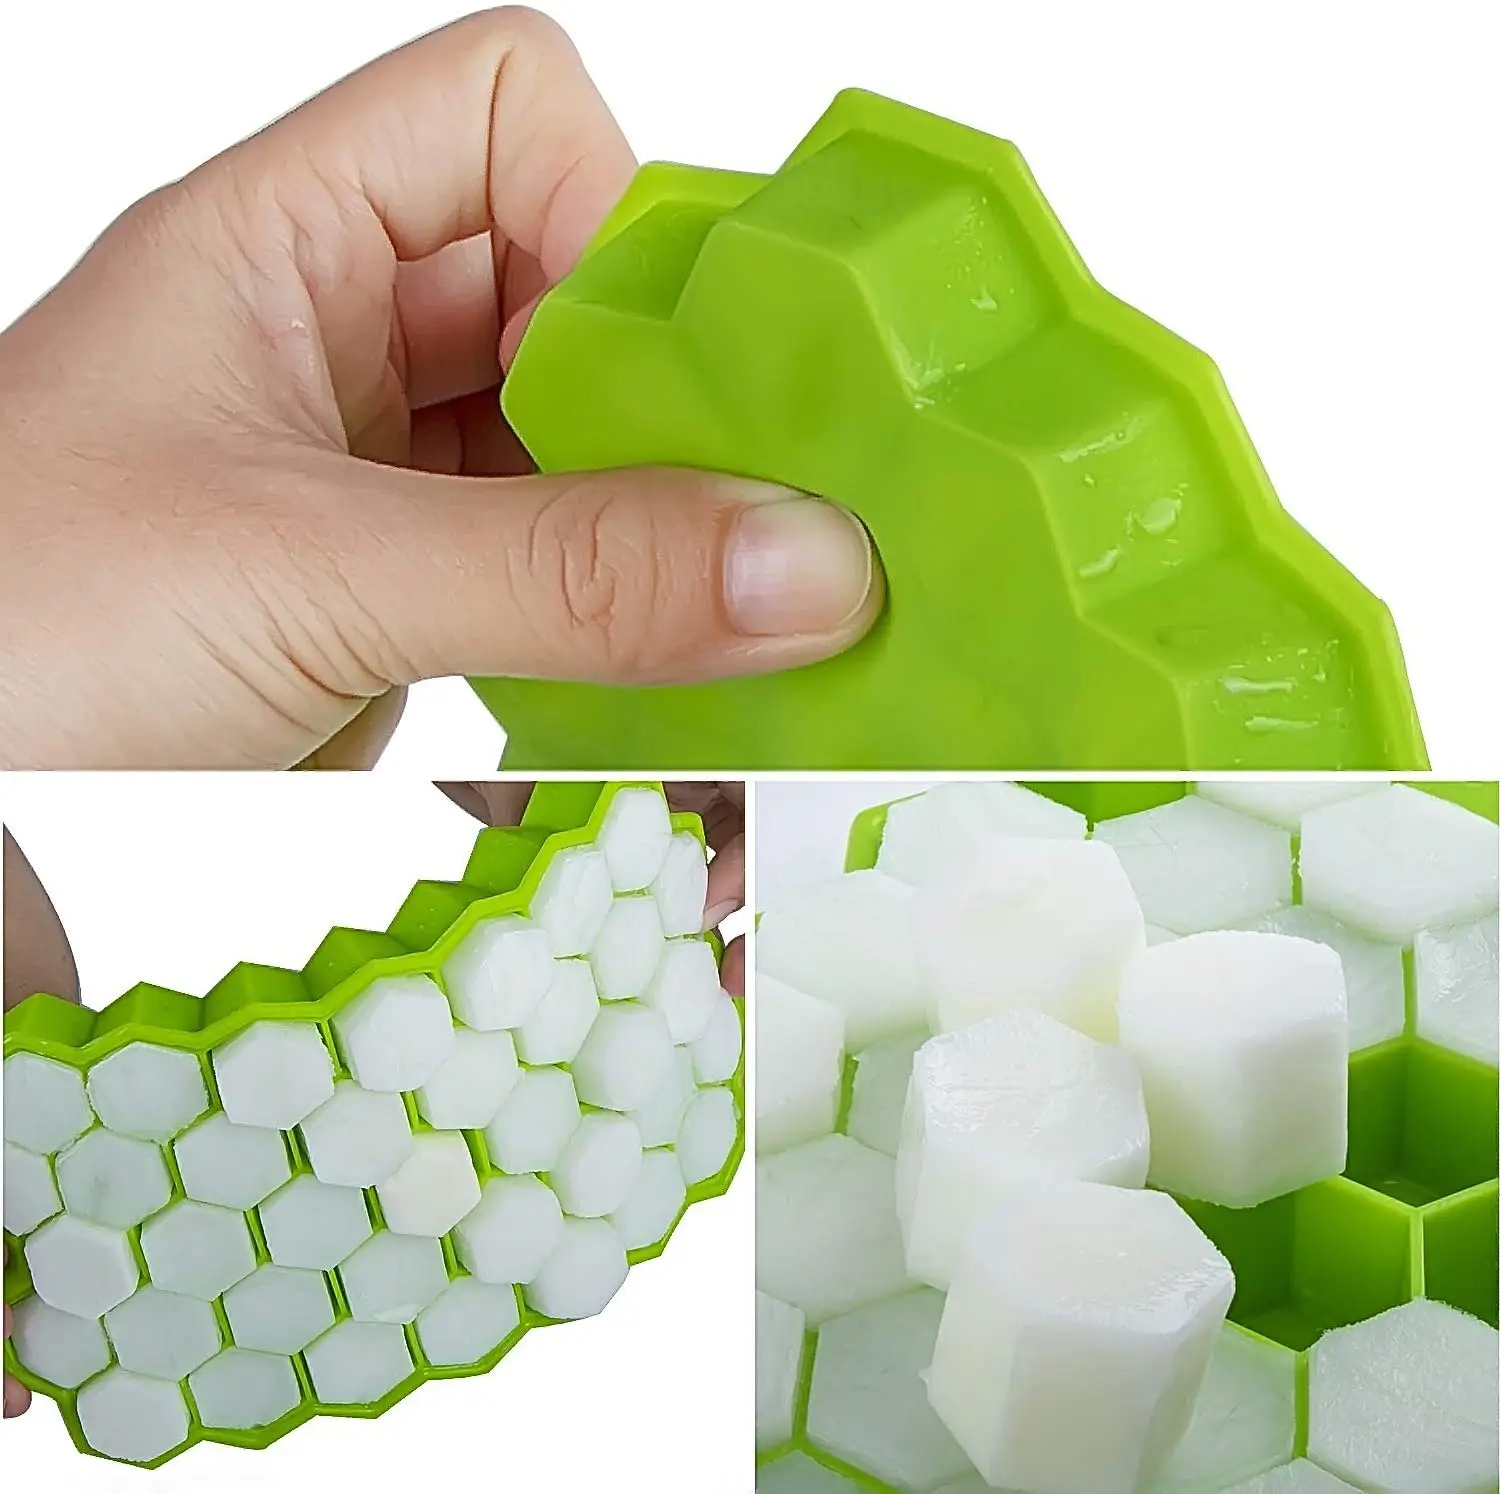 2021 Amazon Hot Sale 37 Grids Honeycomb Silicone Ice Cream Mold Tray with Silicone Lids for Cocktail, Freezer